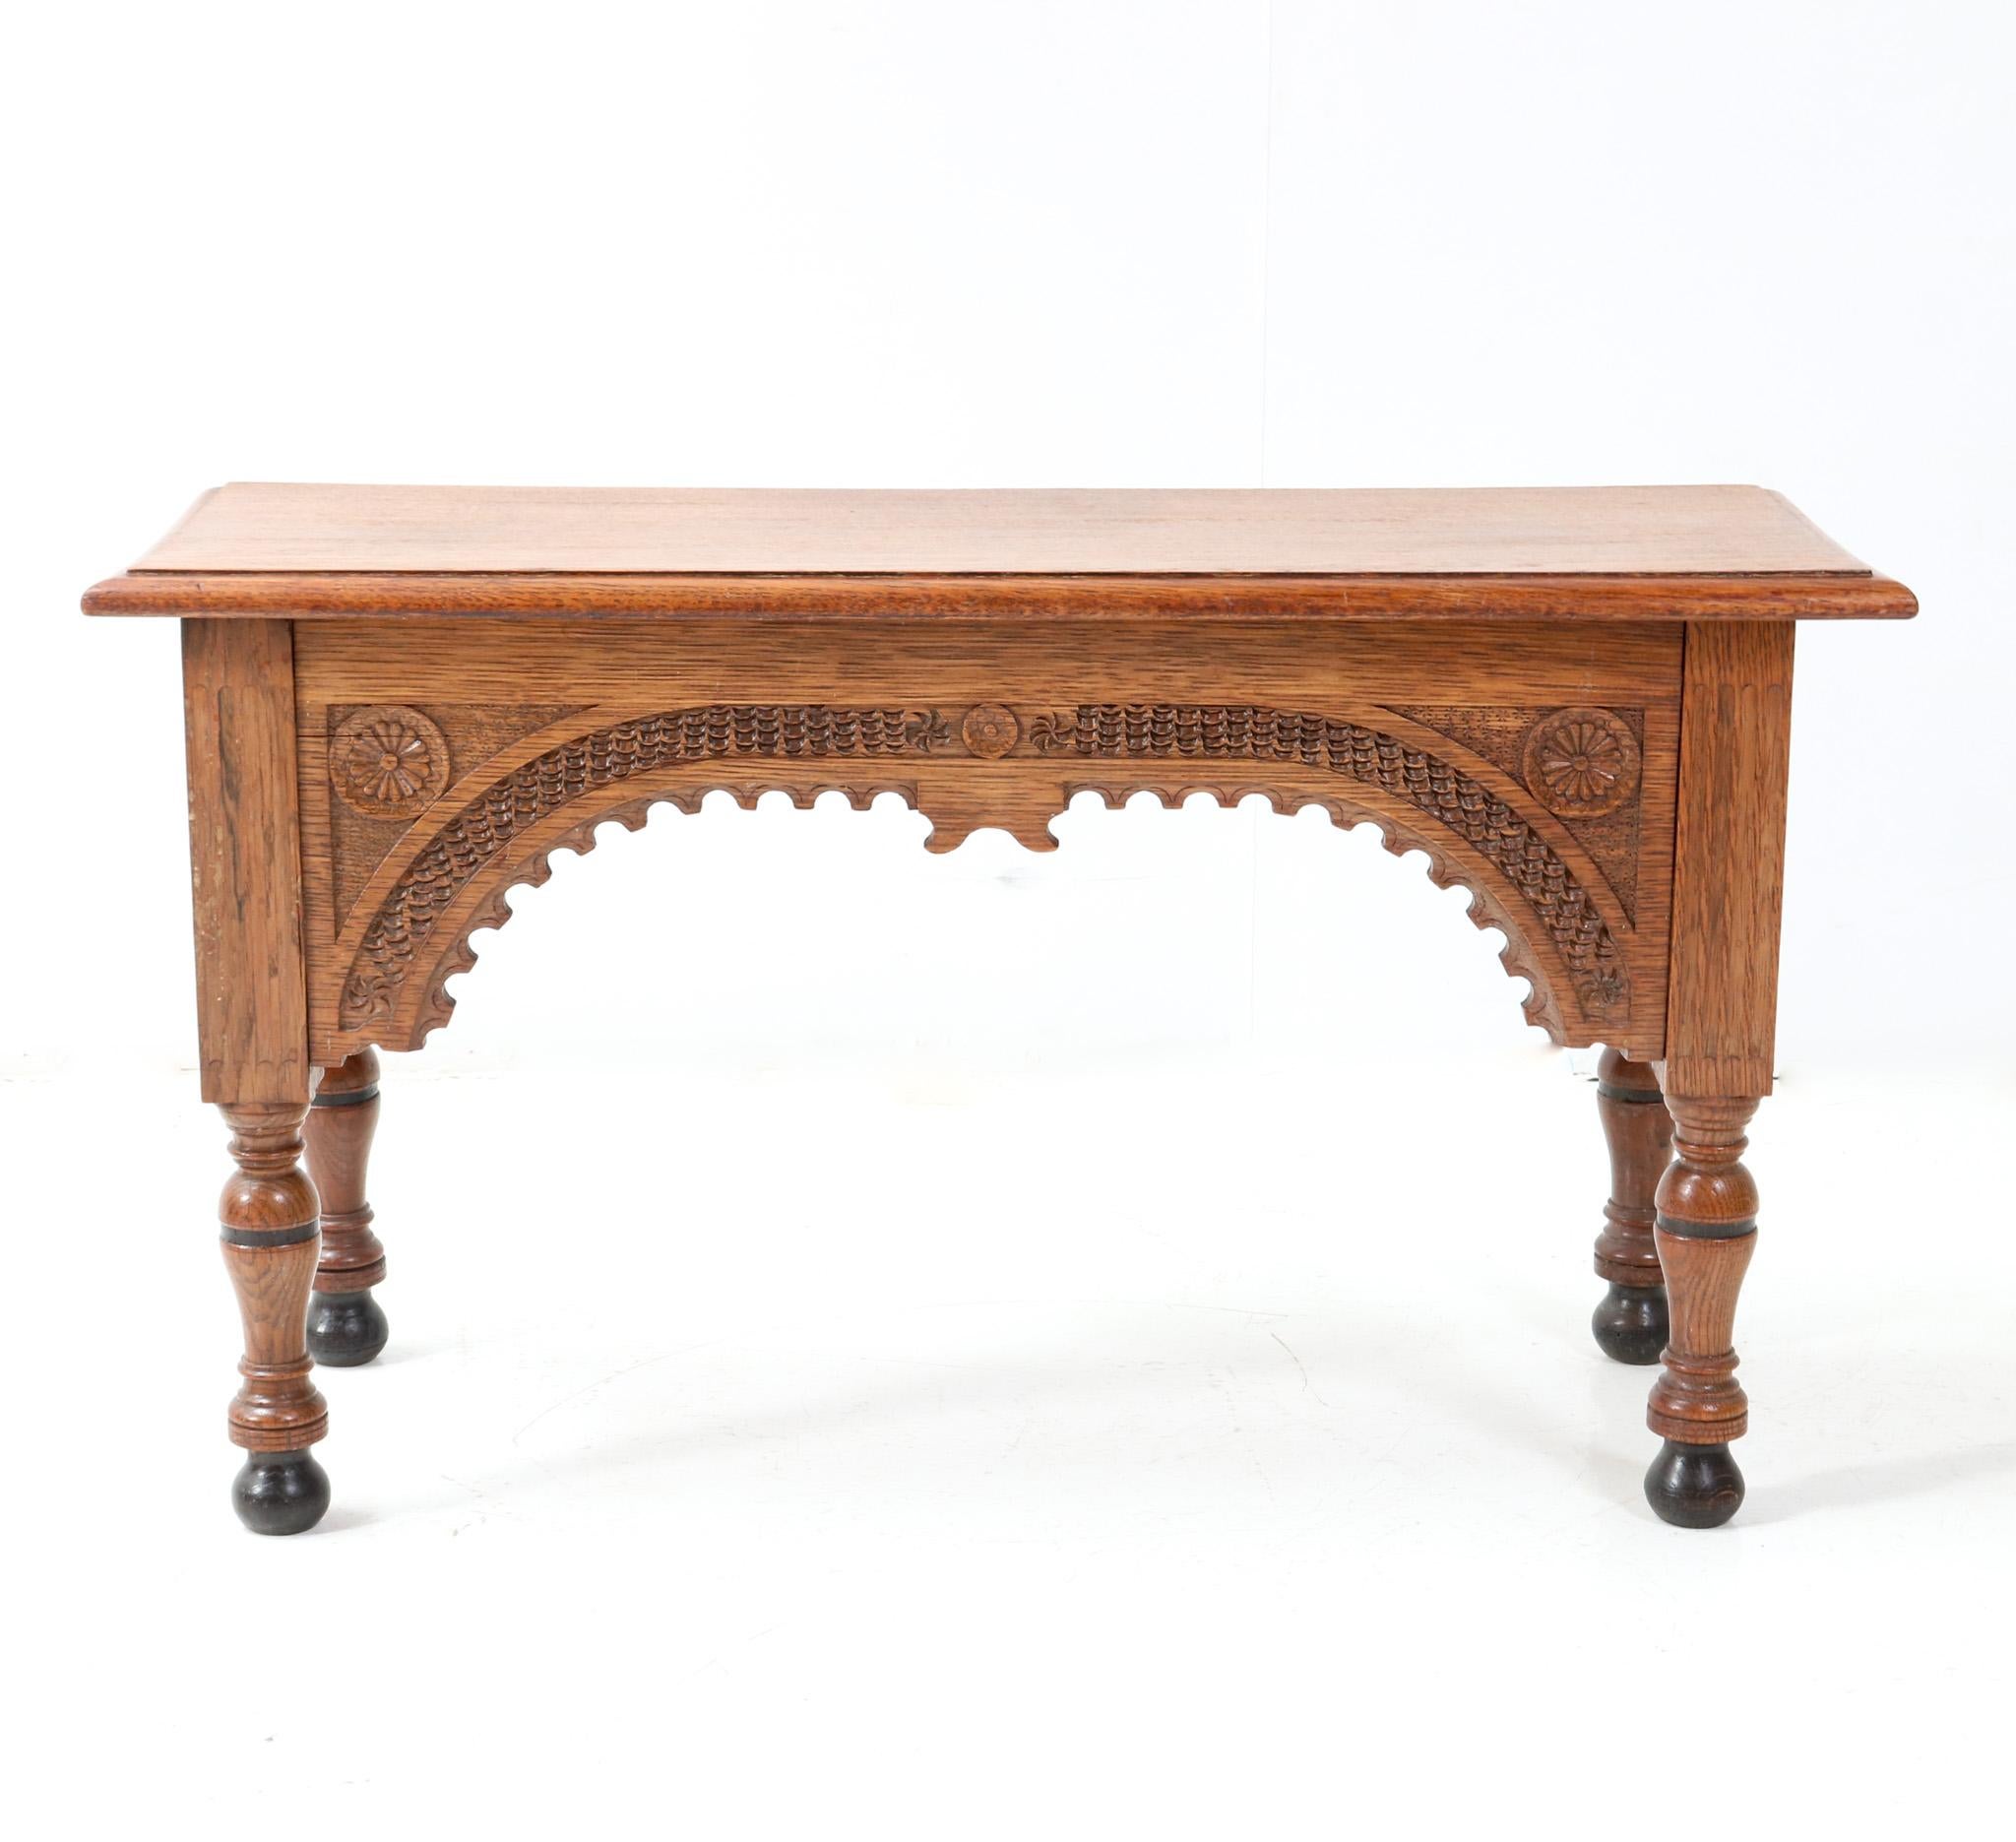 Stunning and rare Renaissance style small bench or side table.
Striking Dutch design from the 17th and 18th century.
Solid oak frame with hand-carved elements.
This wonderful Renaissance style small bench or side table is in very good original